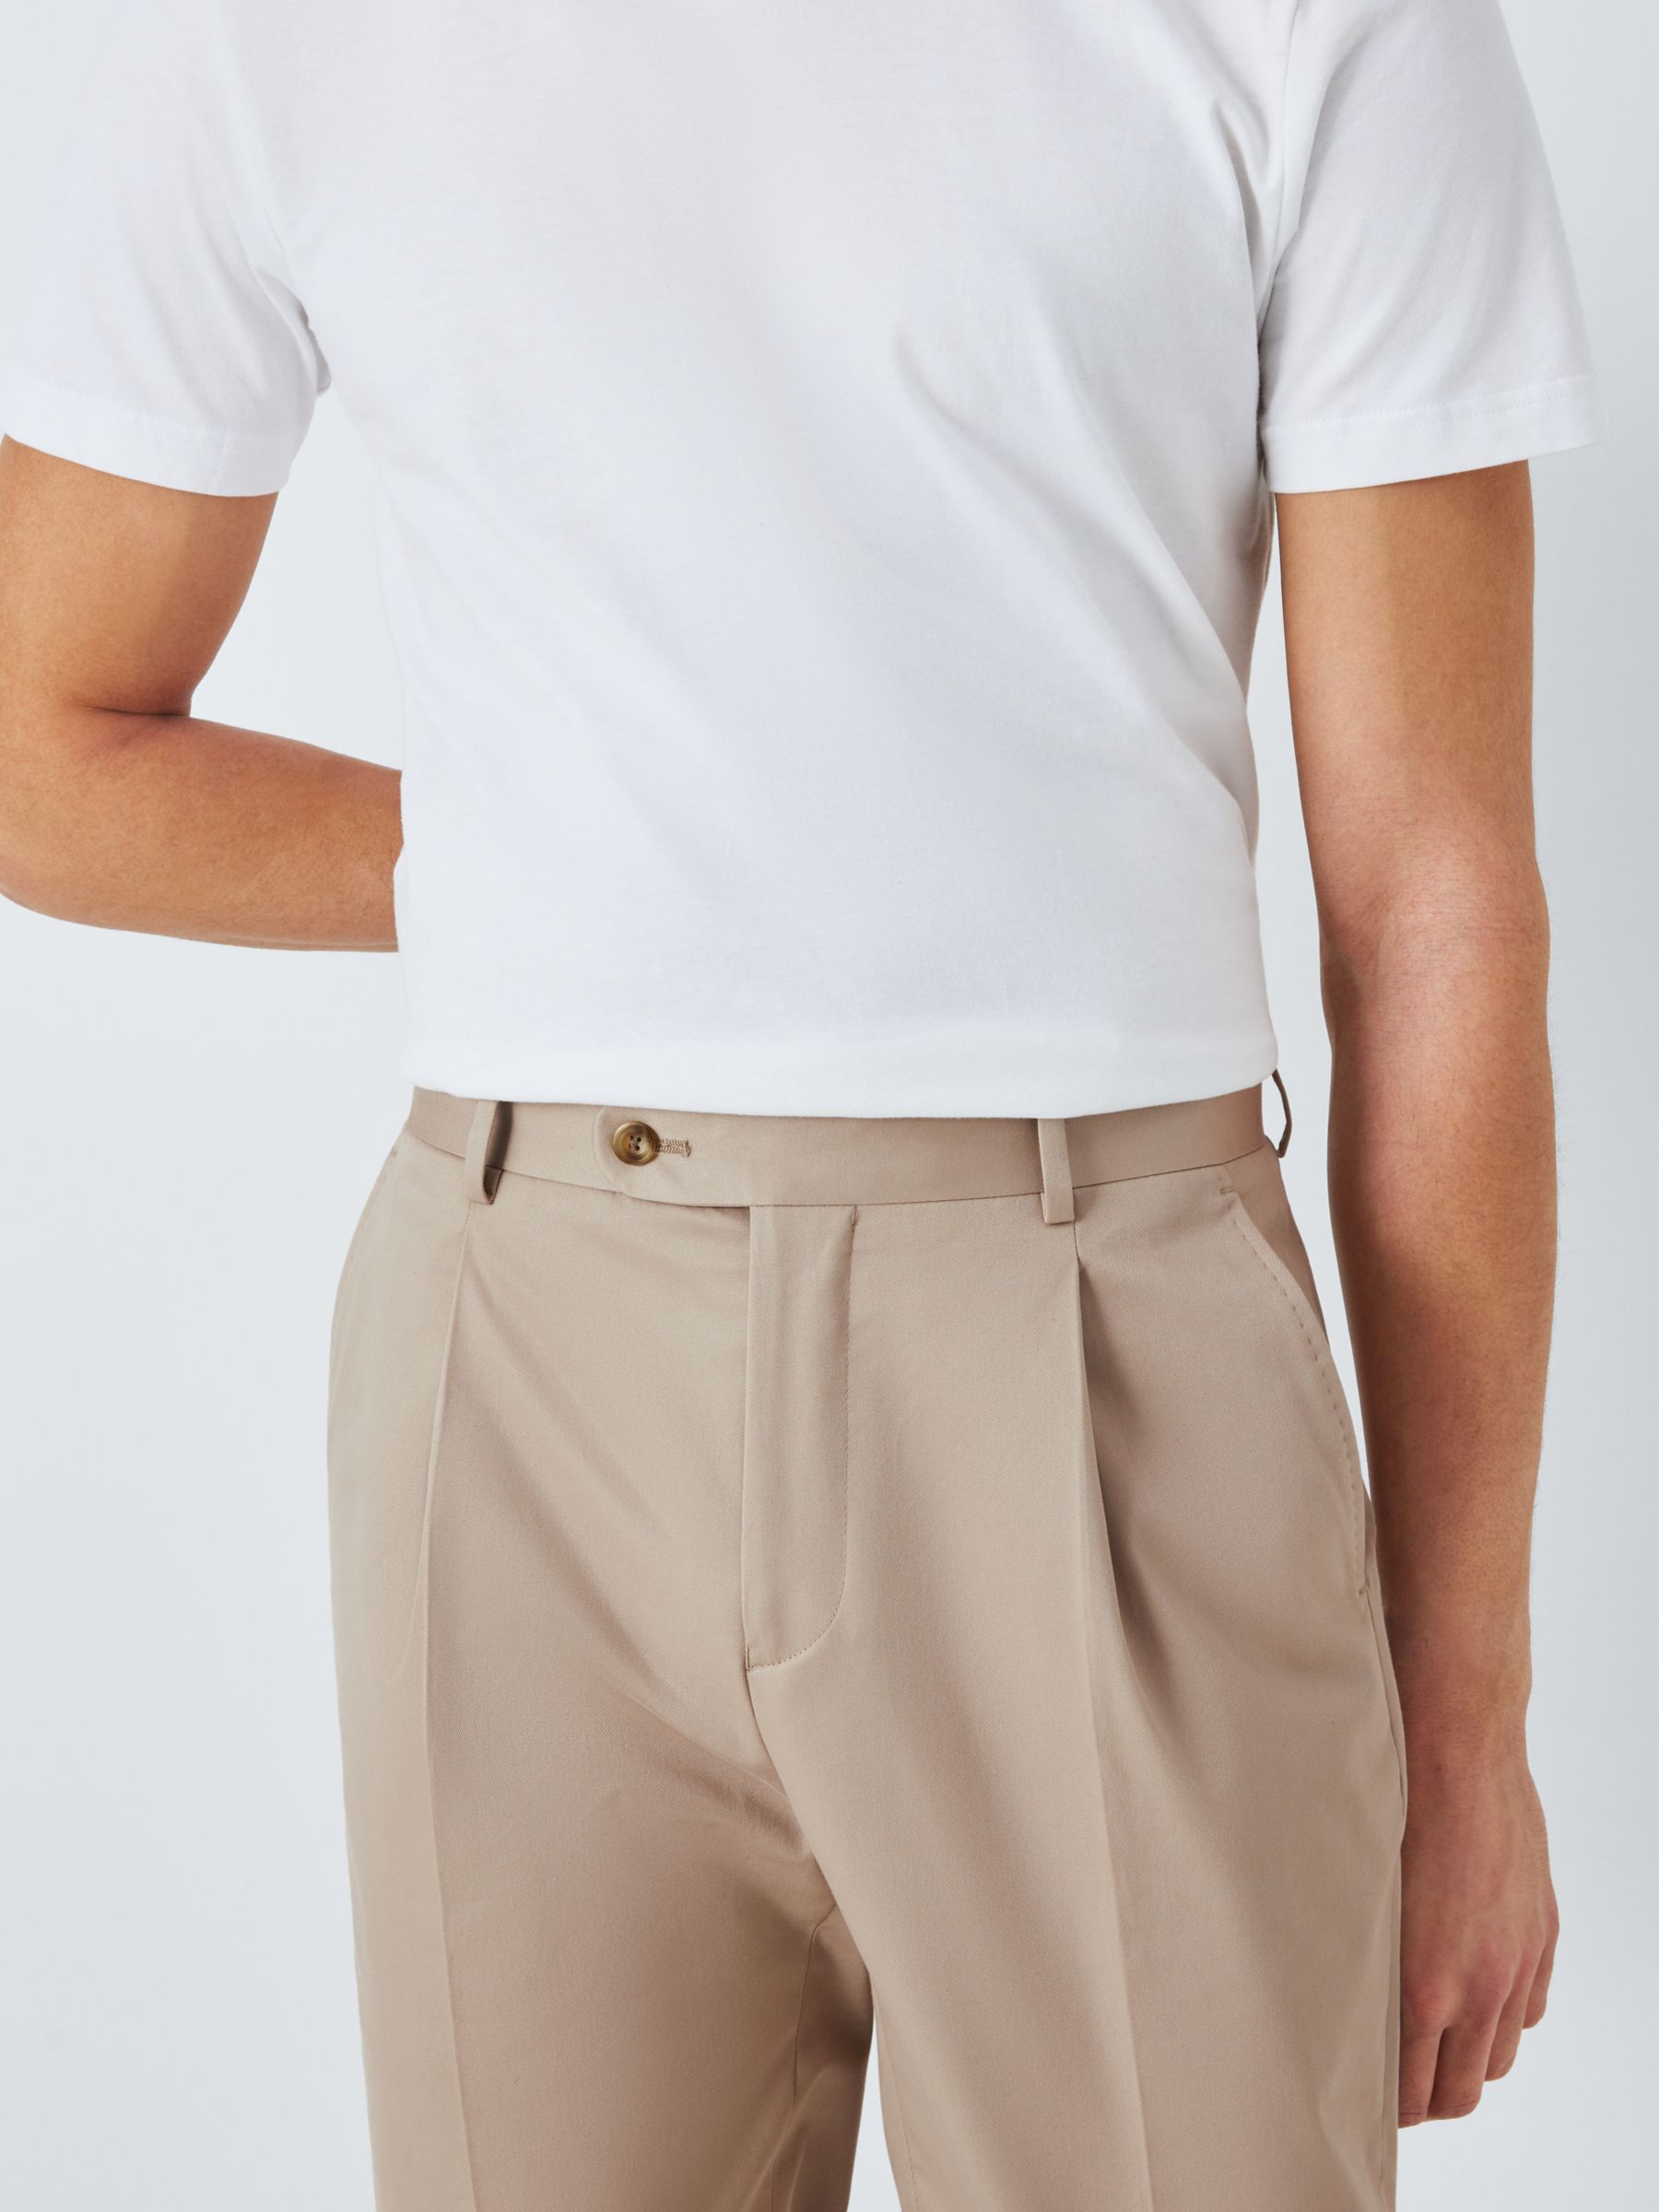 Buy John Lewis Dulwich Cotton Smart Pleat Front Chinos Online at johnlewis.com